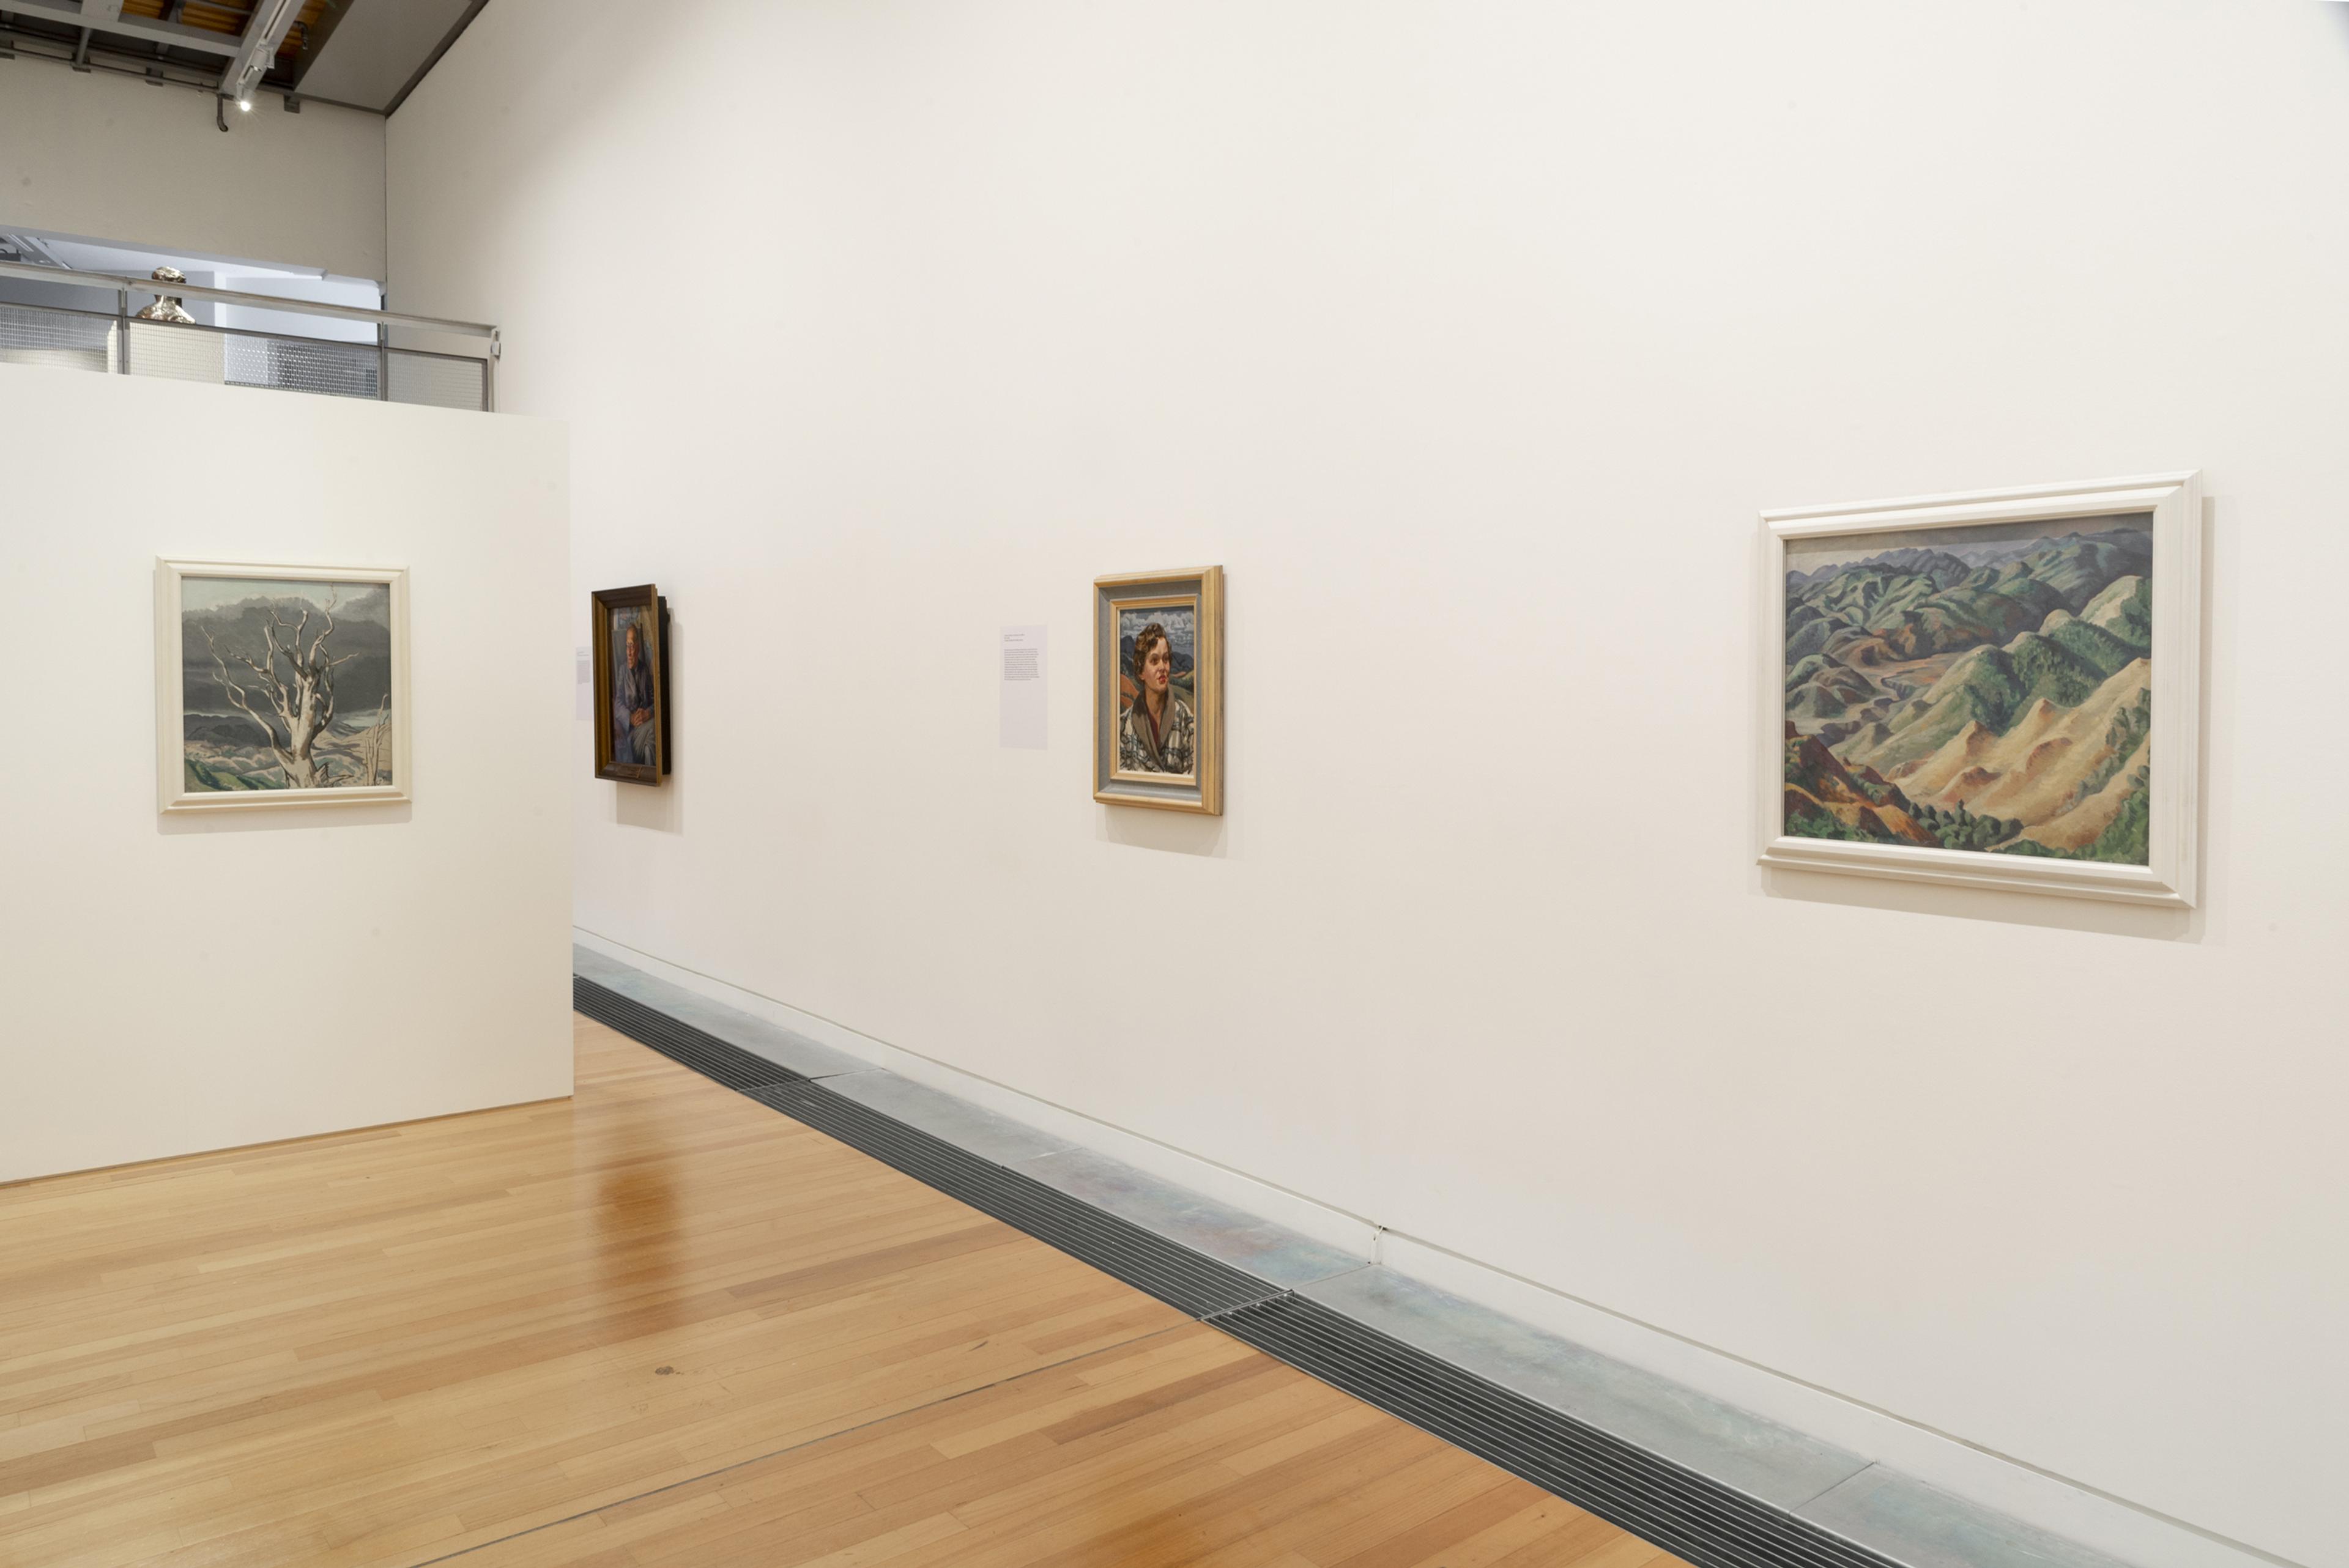 Installation view, ‘Looking for a new country’ – Christopher Perkins in New Zealand, Adam Art Gallery Te Pātaka Toi, Victoria University of Wellington, 6 November 2019 – 22 March 2020. Photo: Shaun Matthews